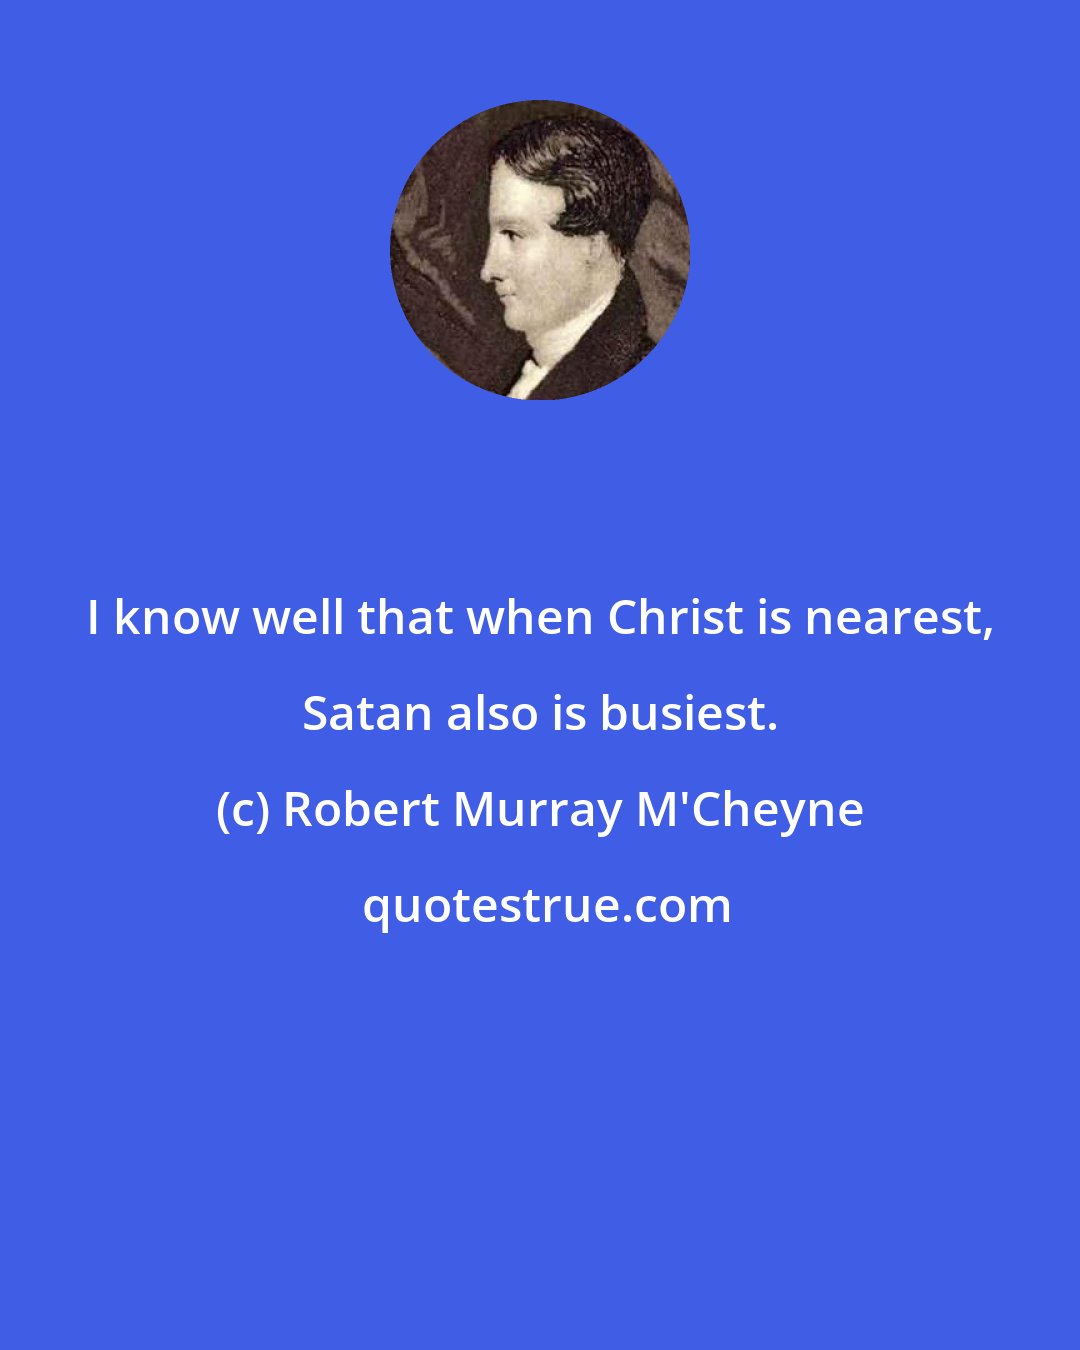 Robert Murray M'Cheyne: I know well that when Christ is nearest, Satan also is busiest.